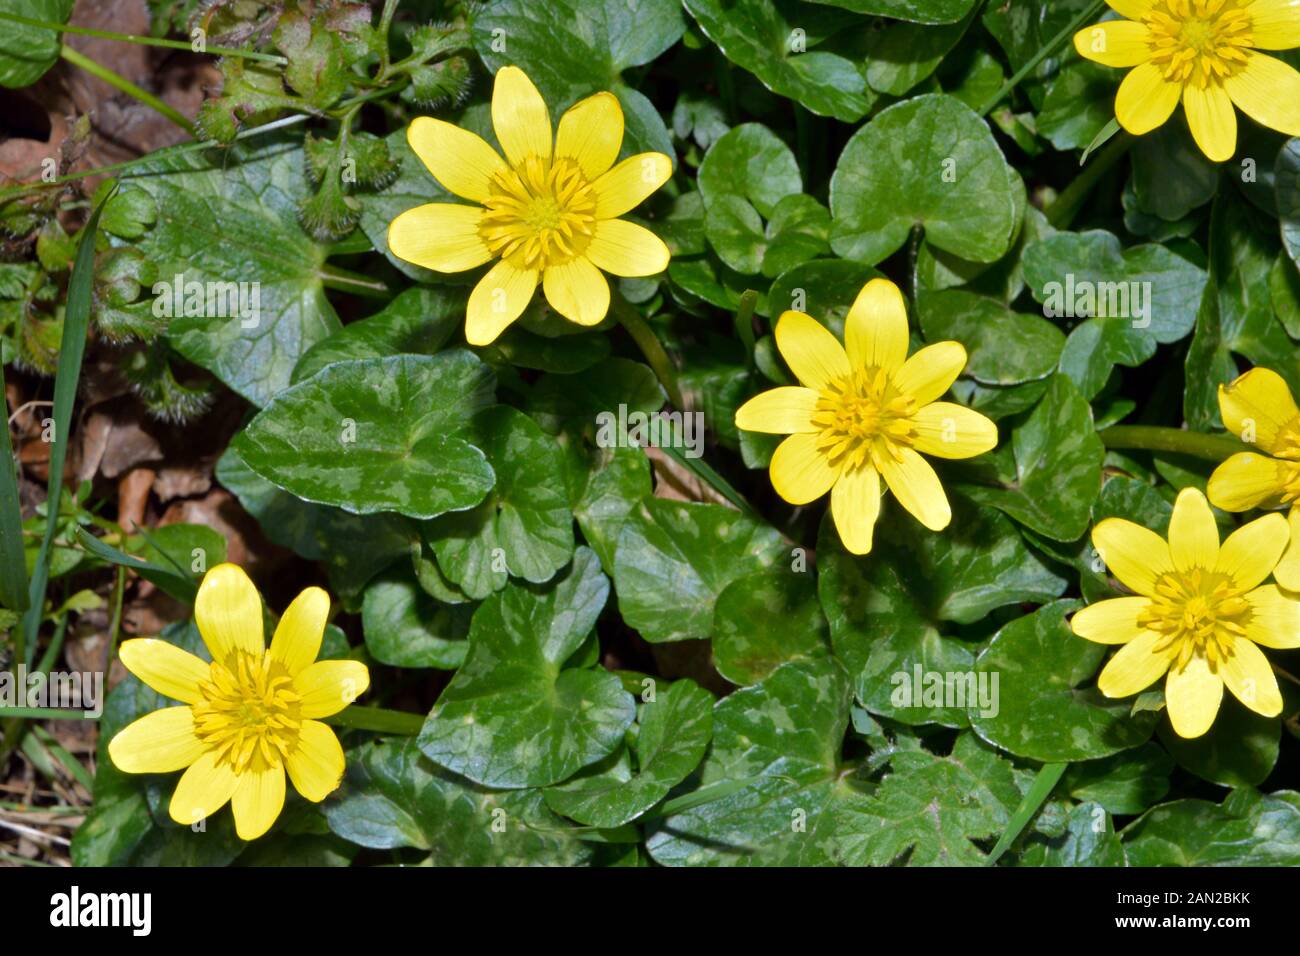 Ficaria verna (lesser celandine) is native to Europe and west Asia growing in seasonally-wet habitats. Stock Photo